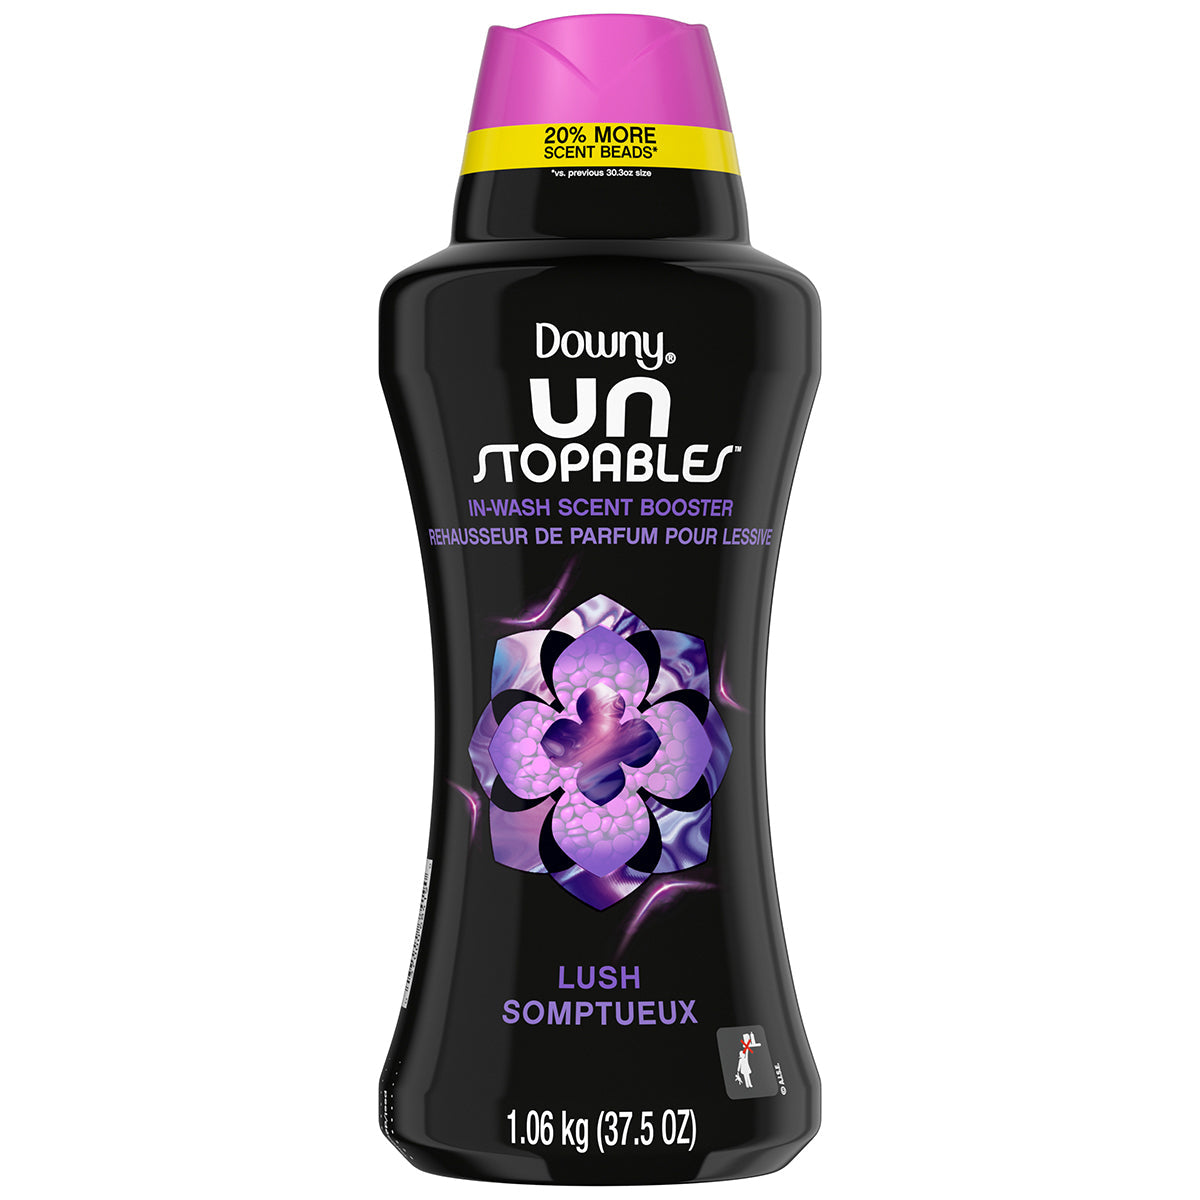 Downy UnStopables Lush Somptueux In-Wash Scent Booster 1.06kg